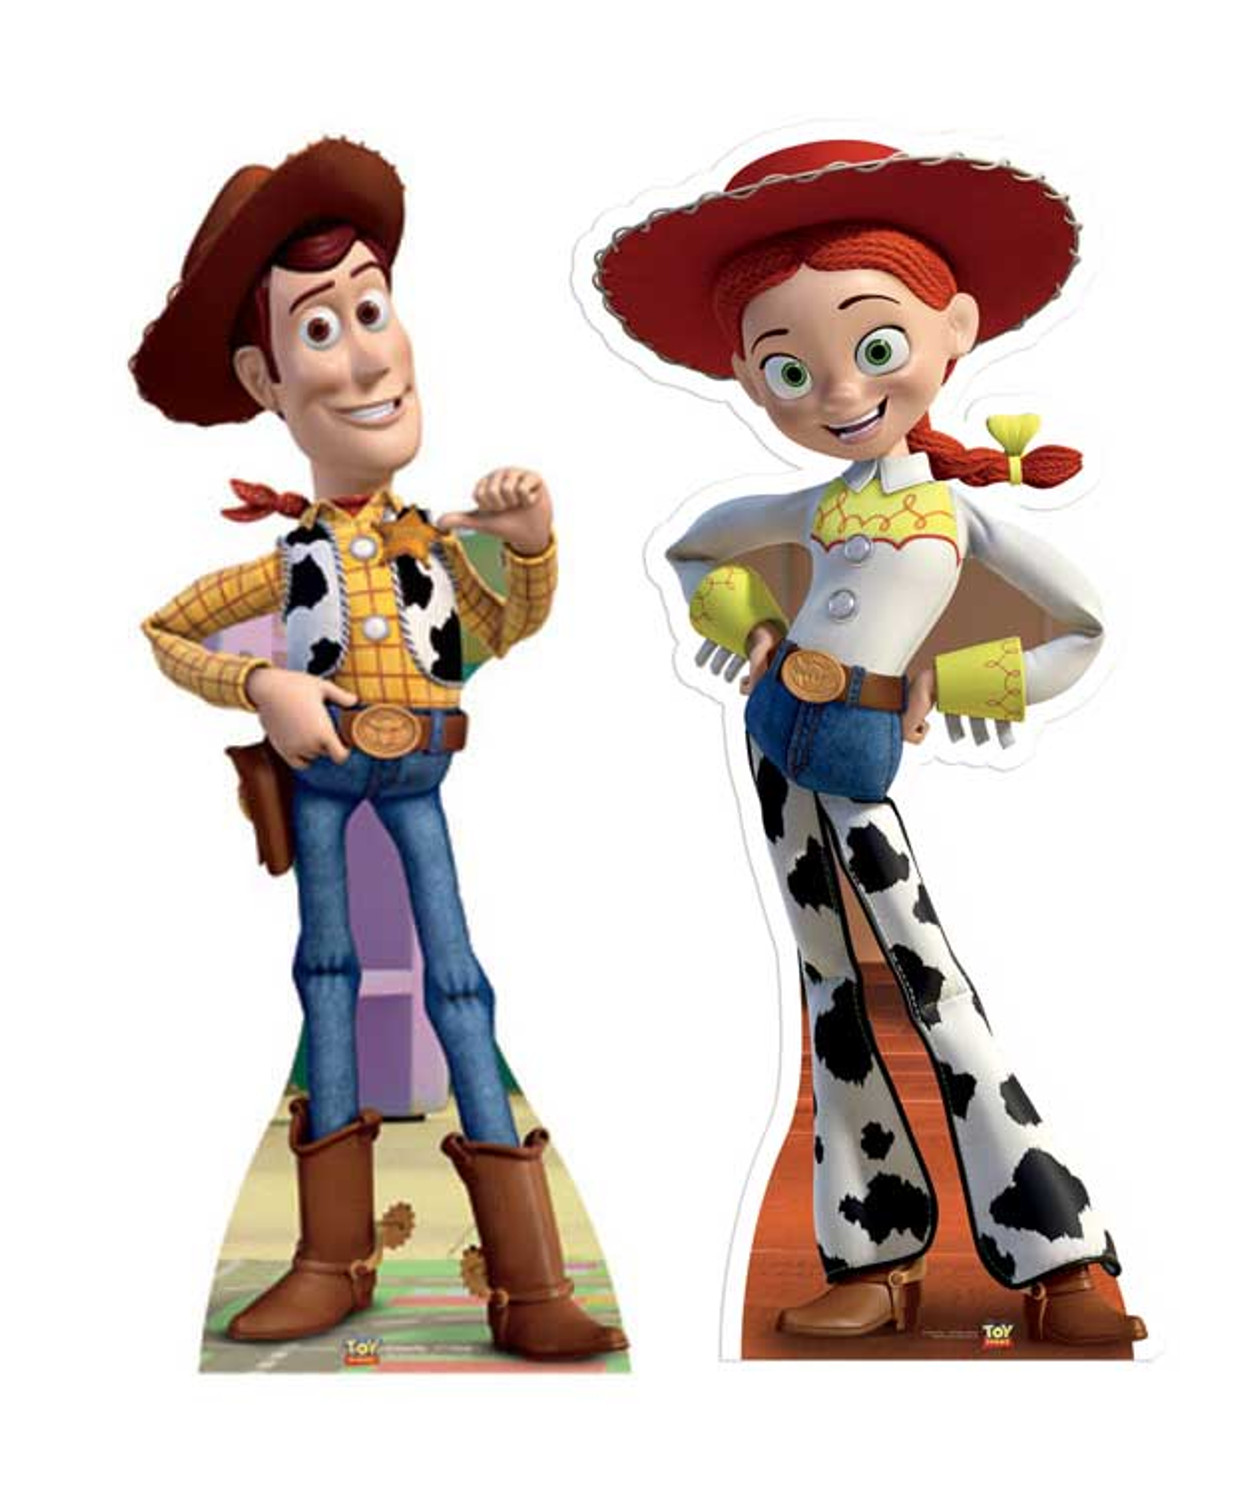 april jules add pics of jessie from toy story photo